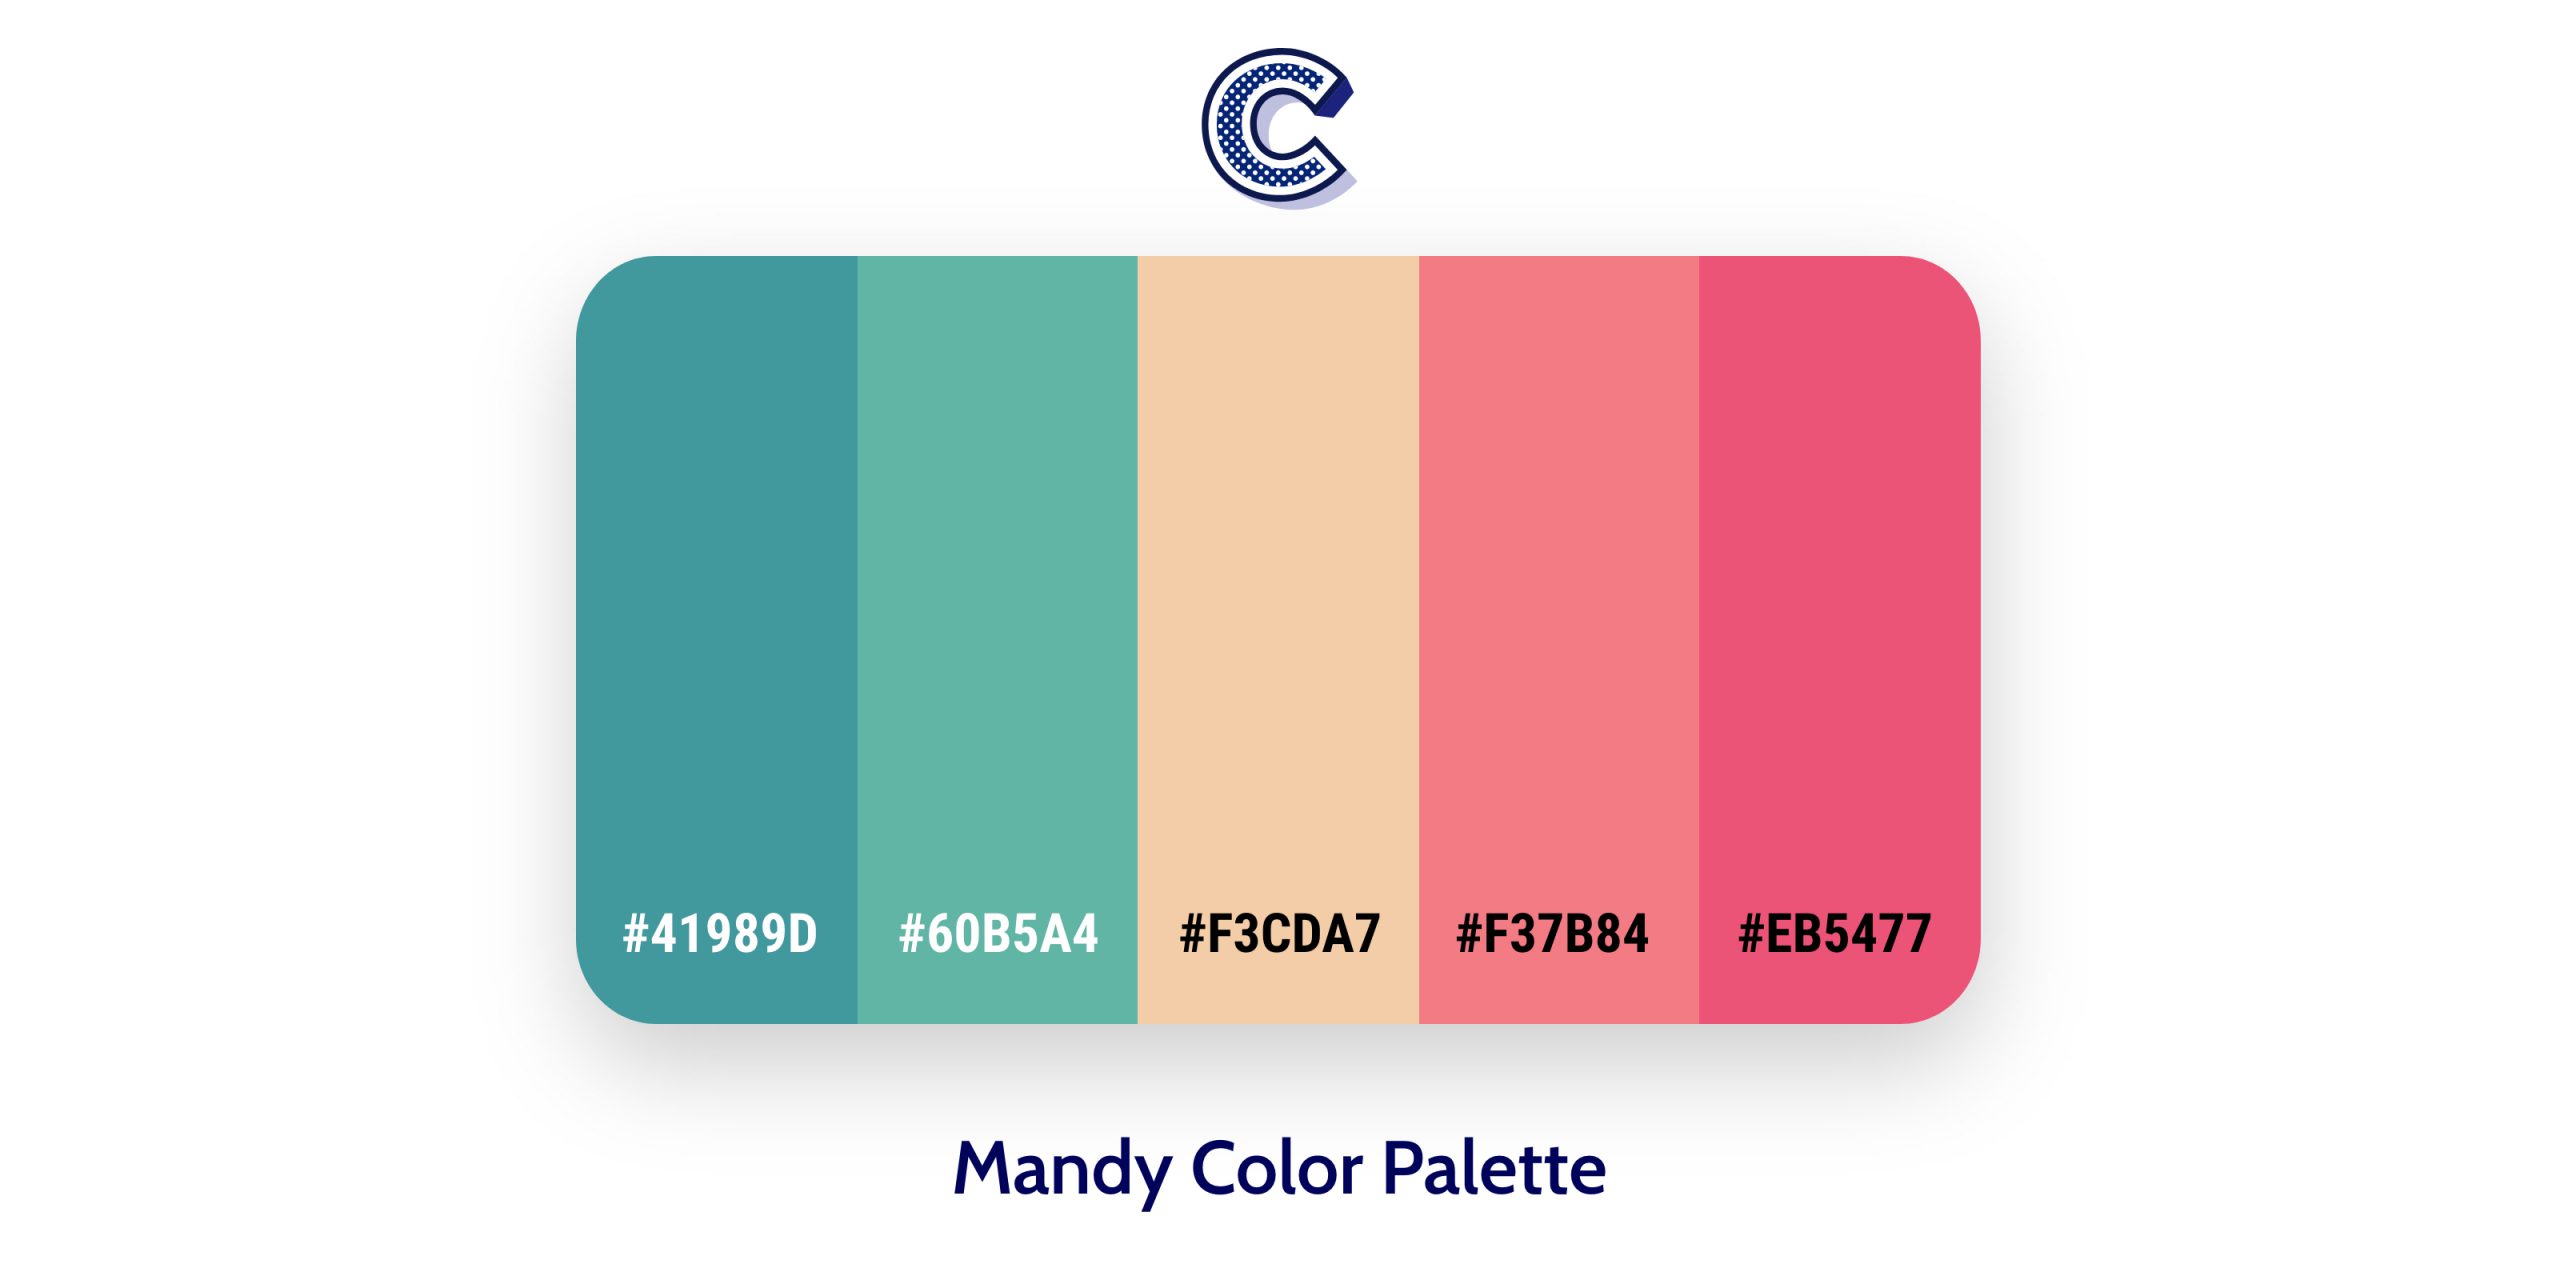 the featured image of mandy color palette